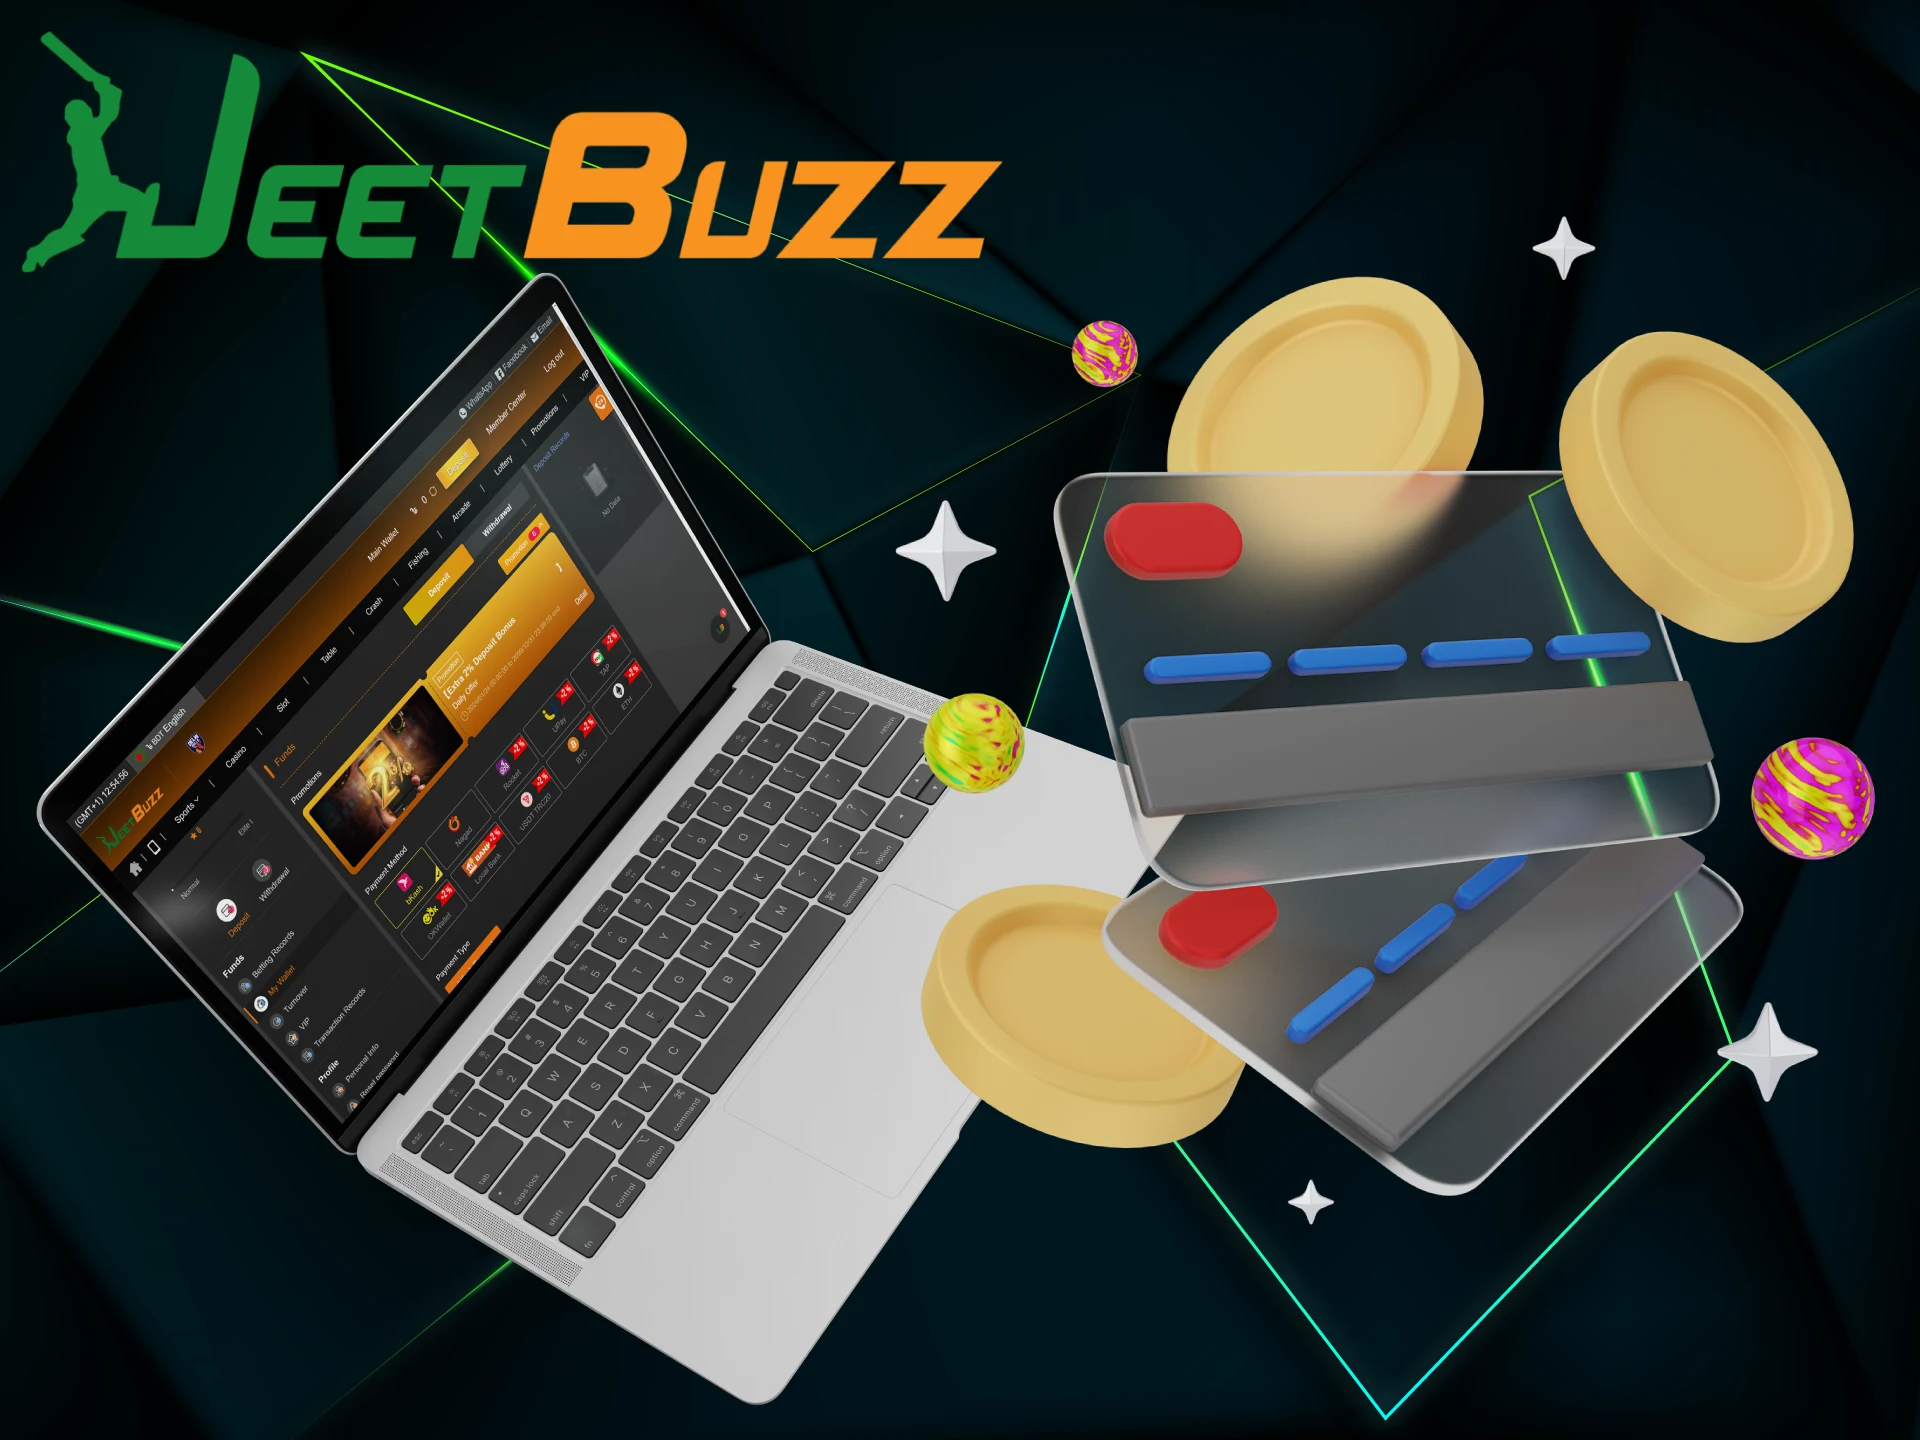 Players from Bangladesh can effortlessly deposit and withdraw funds from their JeetBuzz account in a convenient way.